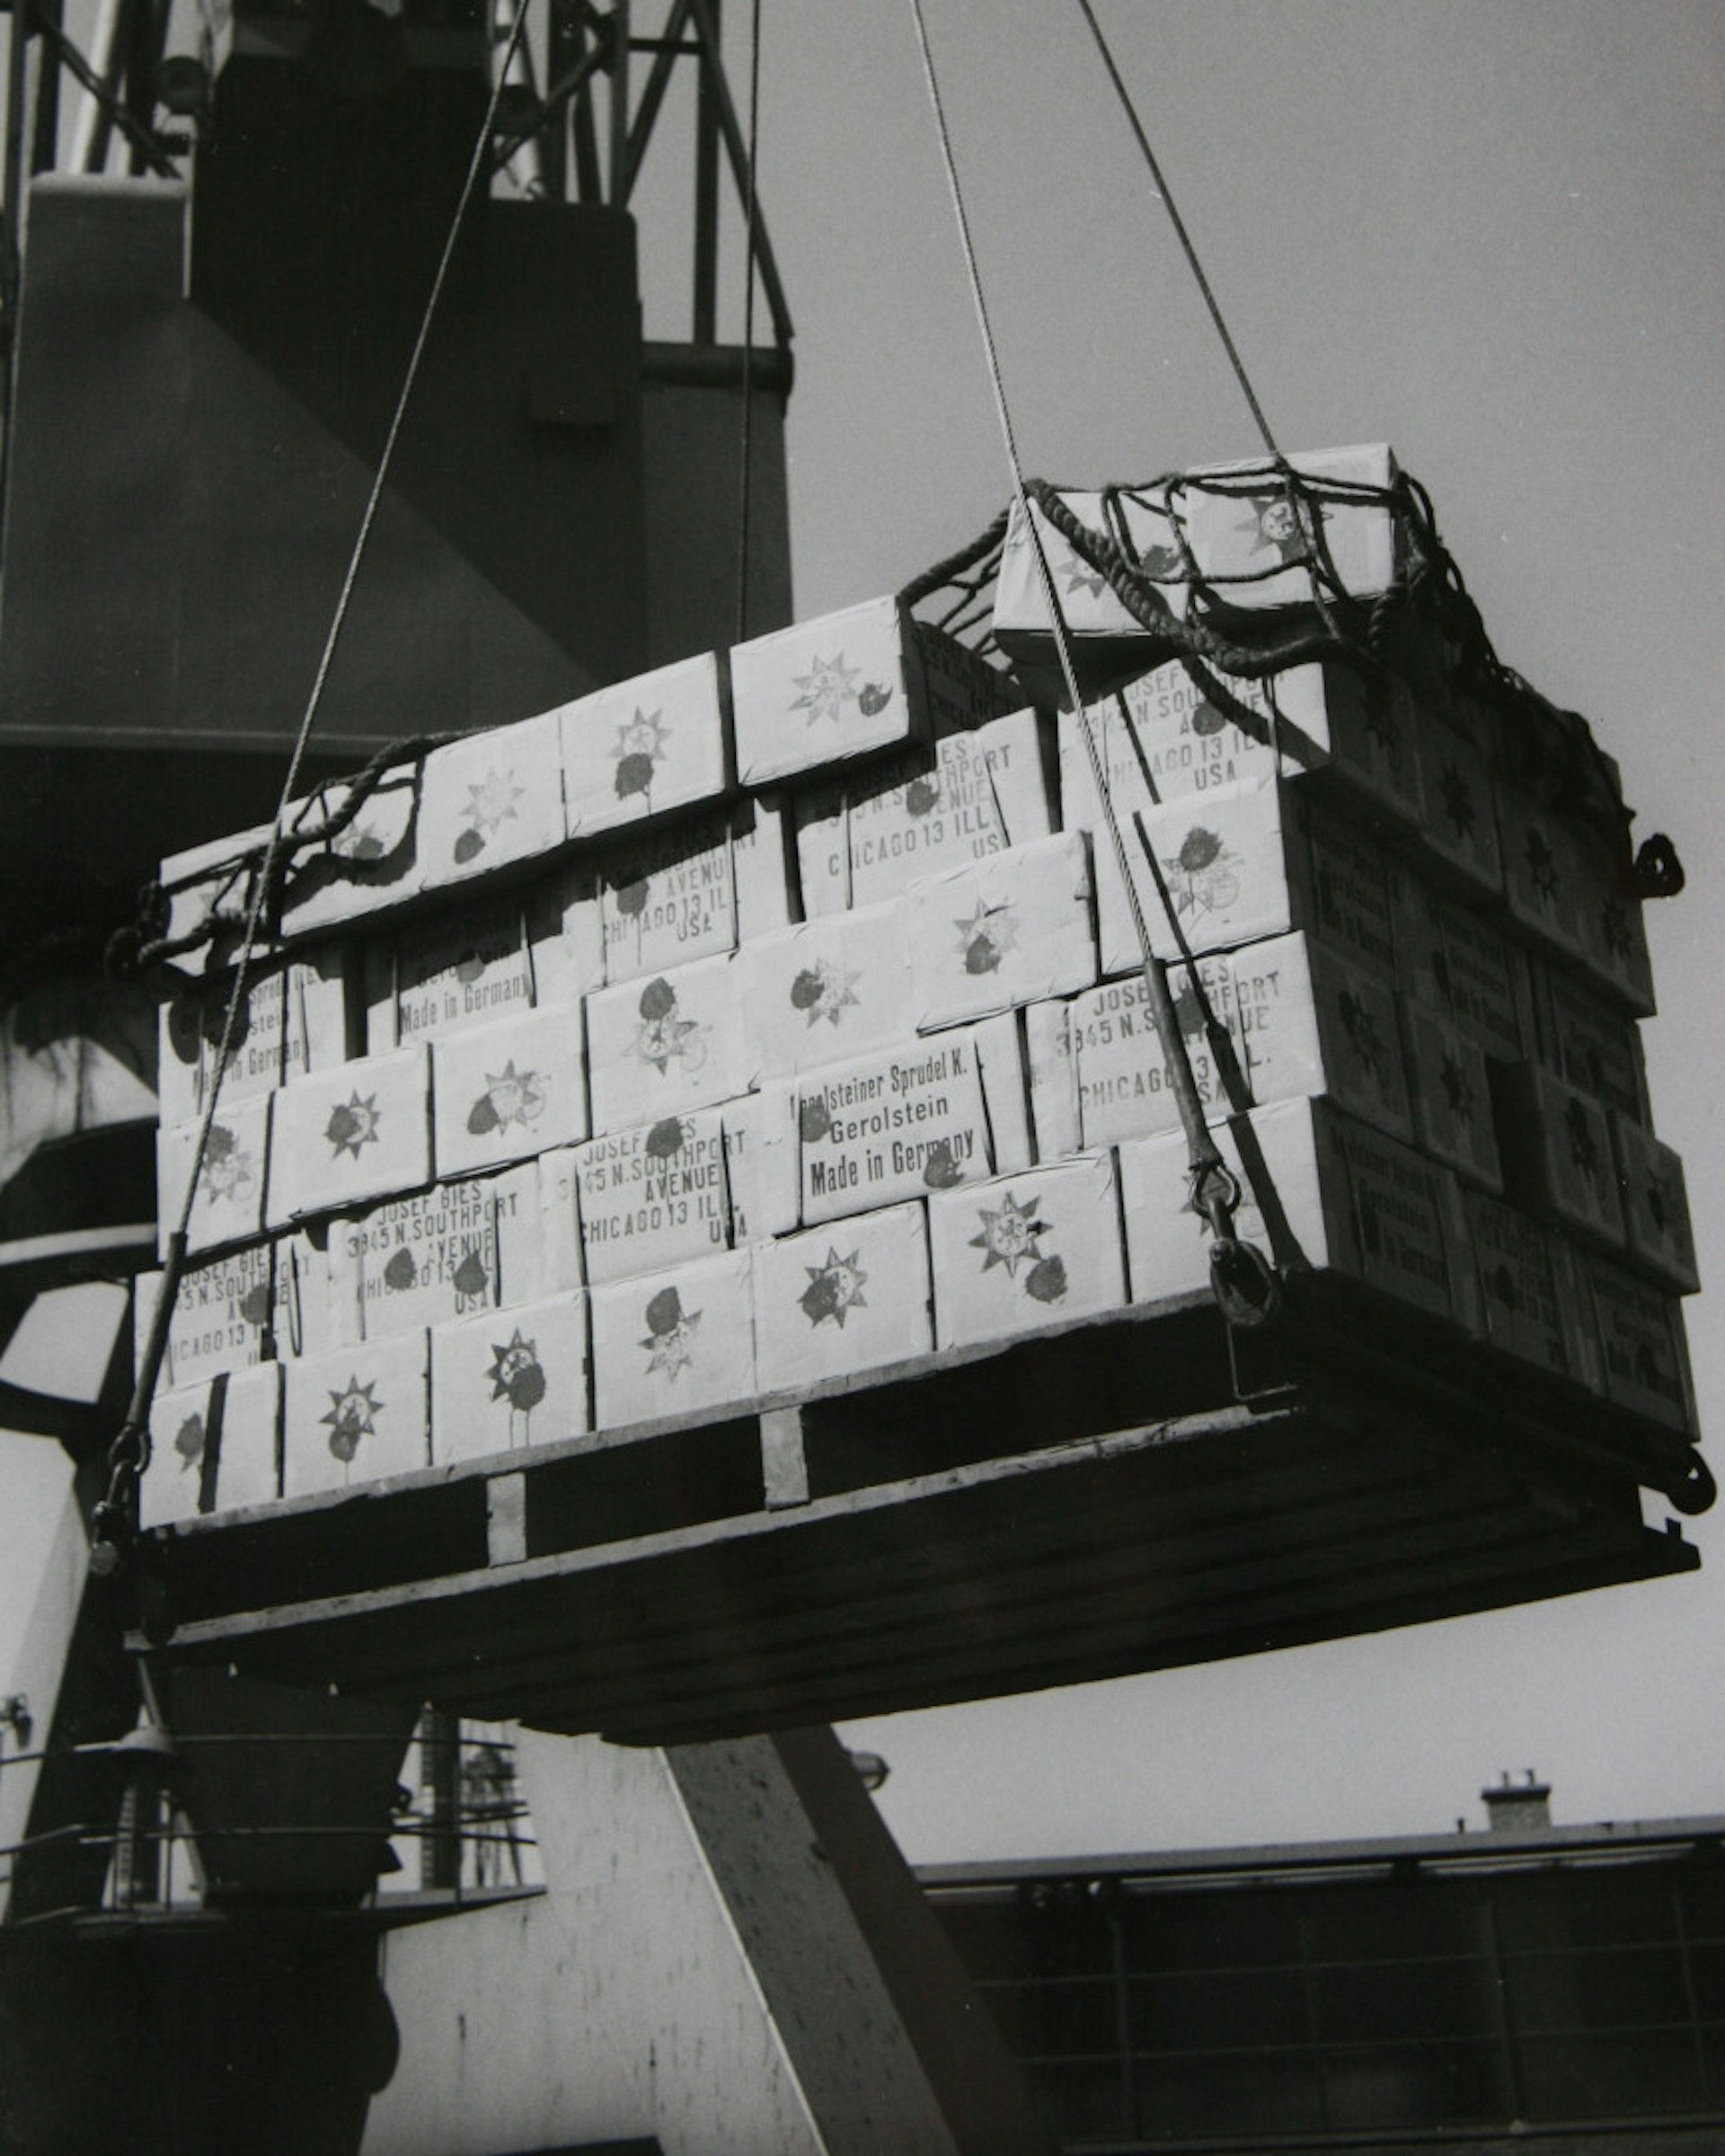 Black and white photograph of a Gerolsteiner shipment, to be transported via ship. 